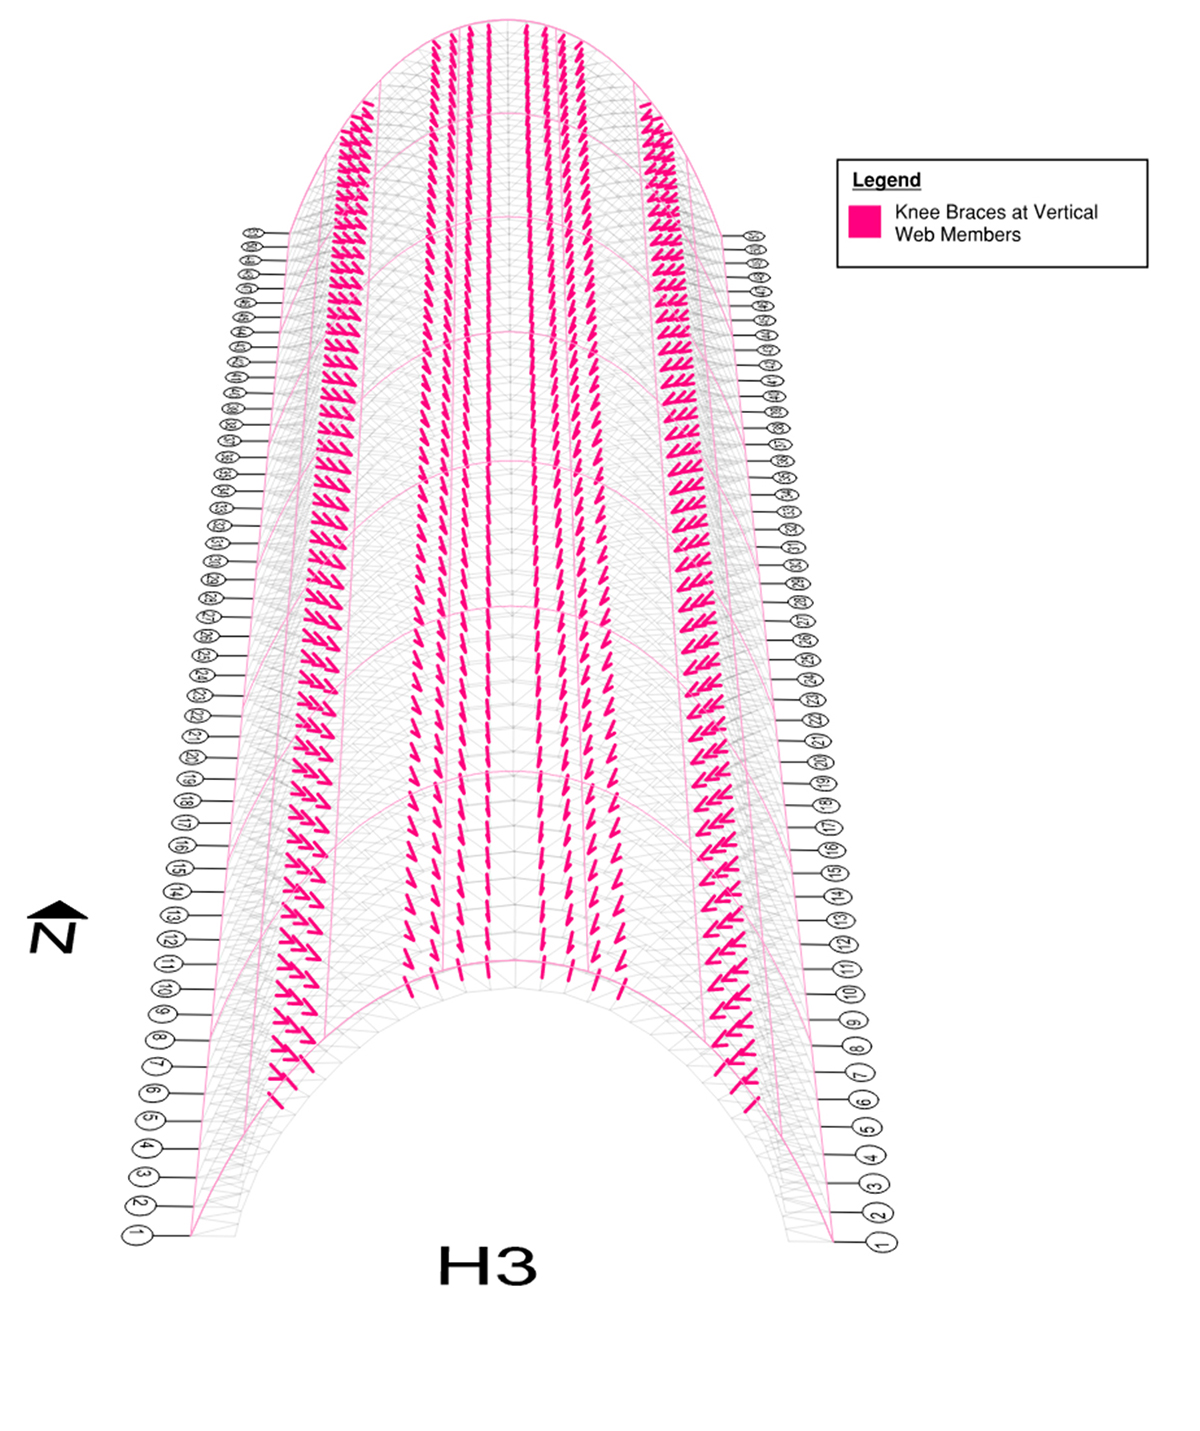 A 3D drawing of the entire length of Hangar 3 looking down on its parabolic arch trusses. The areas of the trusses that have been repaired are pink.